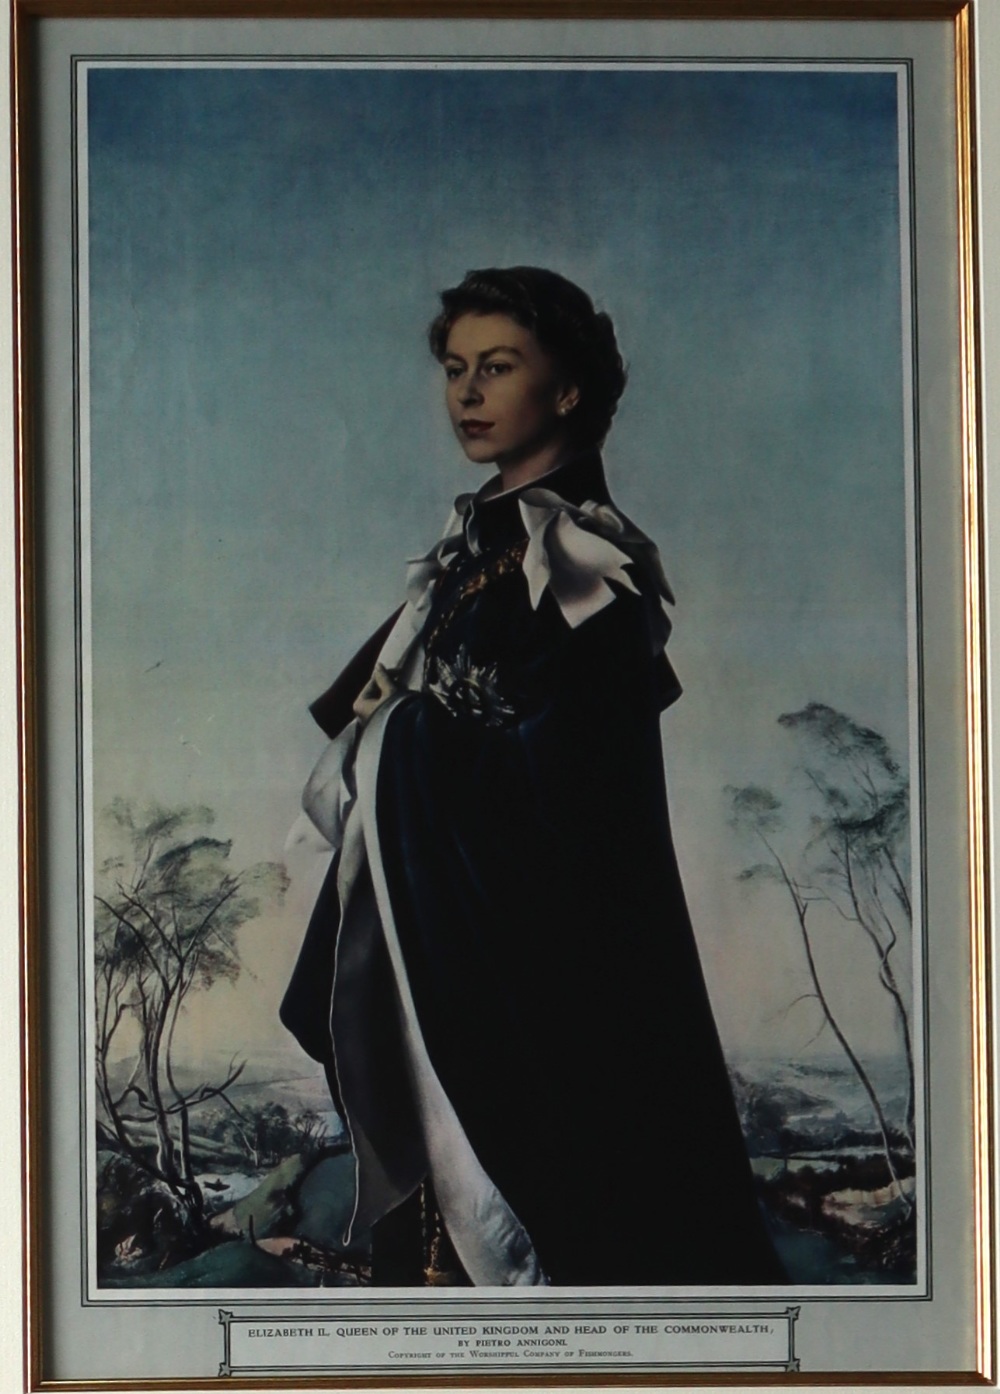 Queen Elizabeth II a framed image of the young Queen after Pietro Annigoni together with an autopen - Image 2 of 4